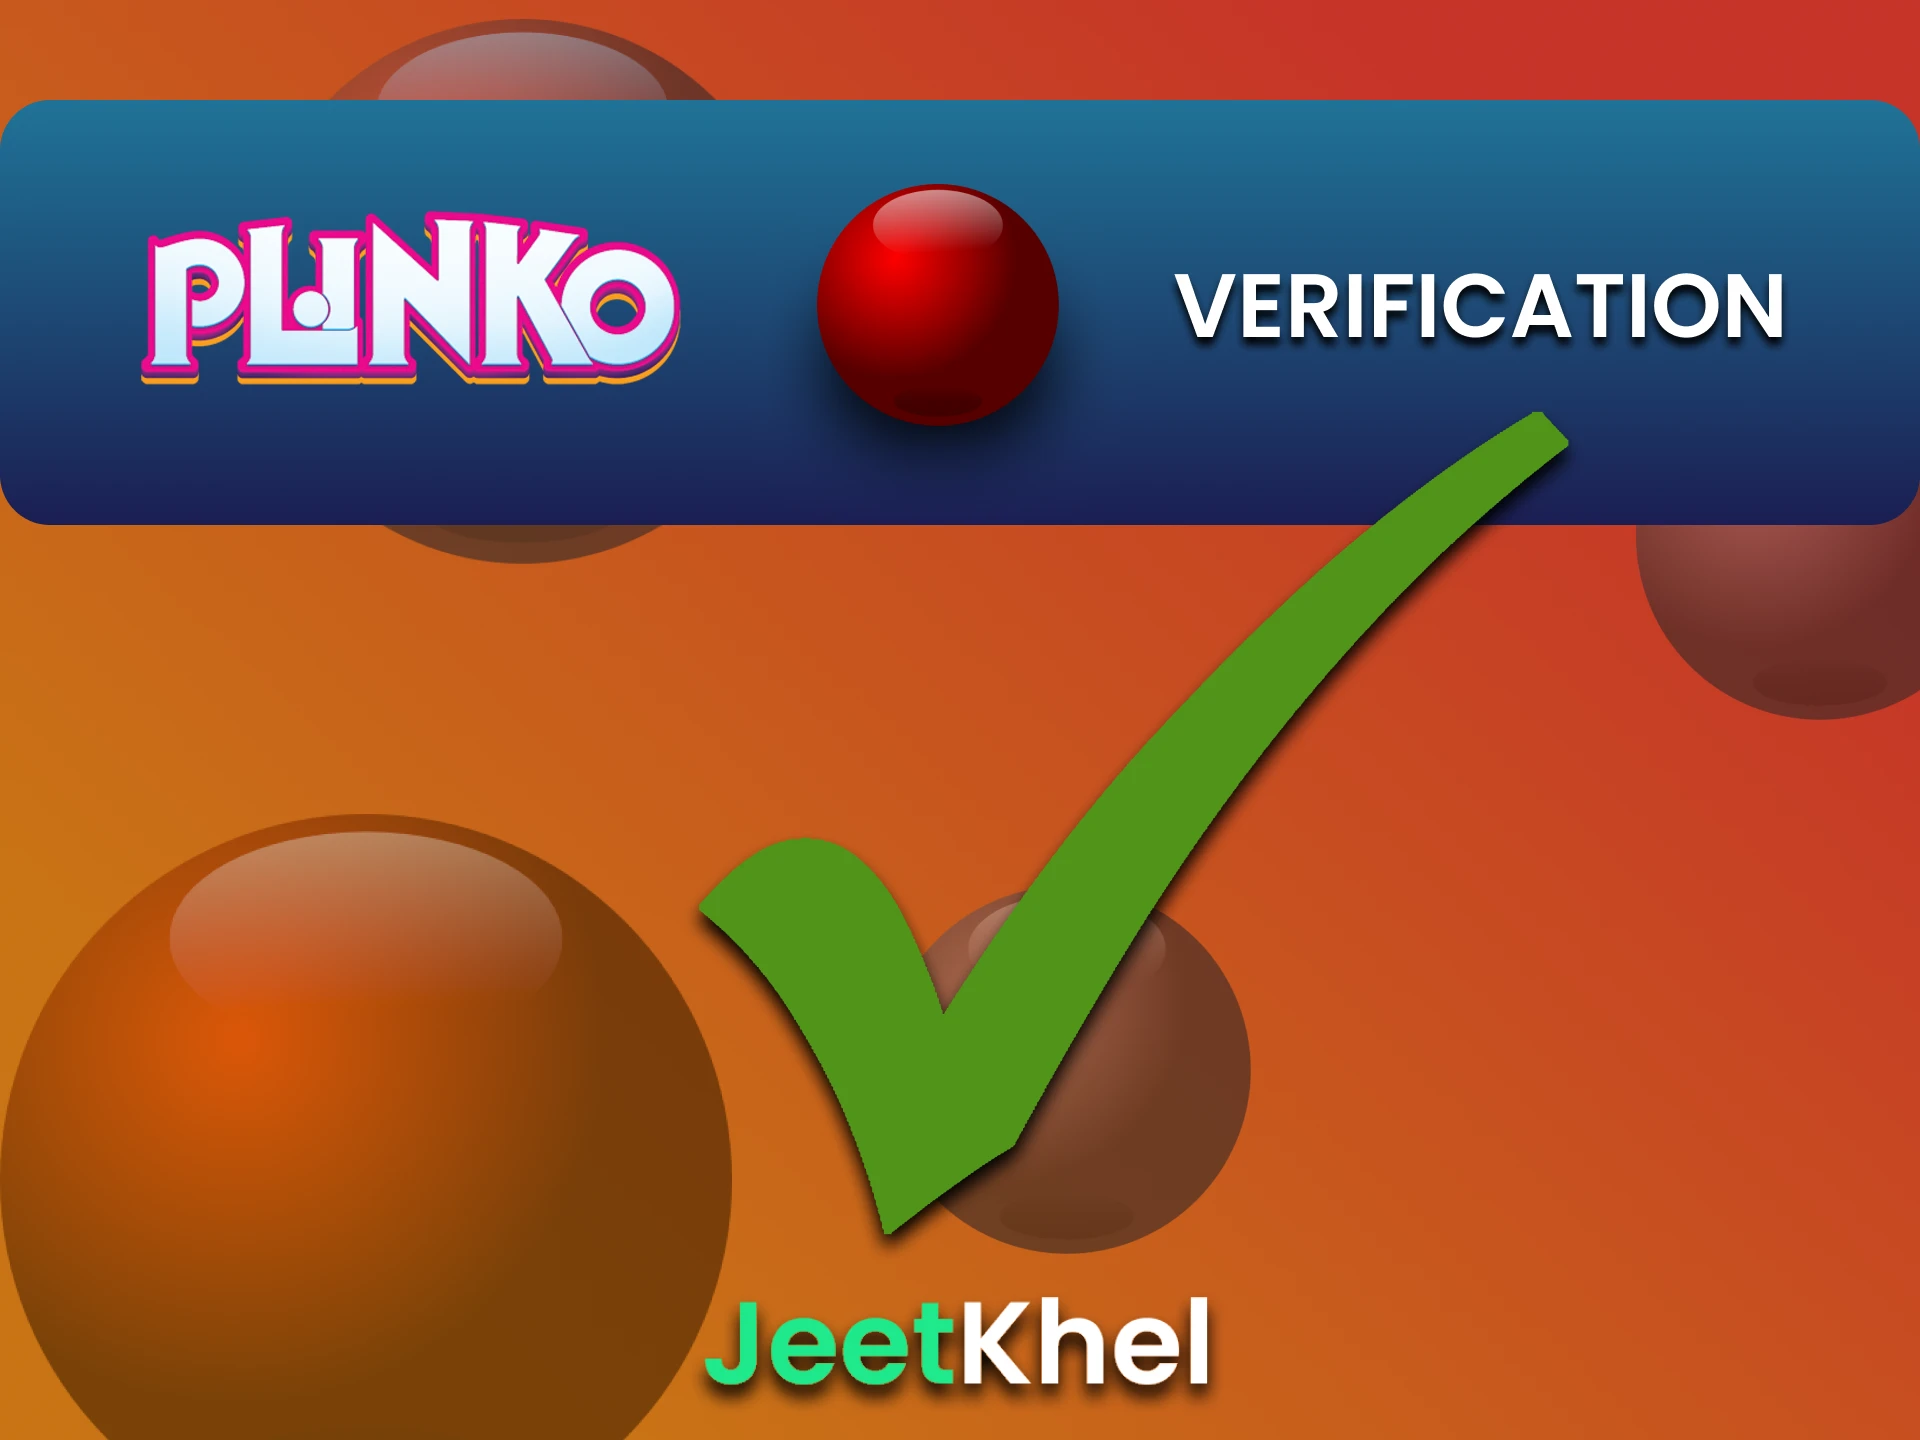 Fill in all the details on the JeetKhel website to play Plinko.